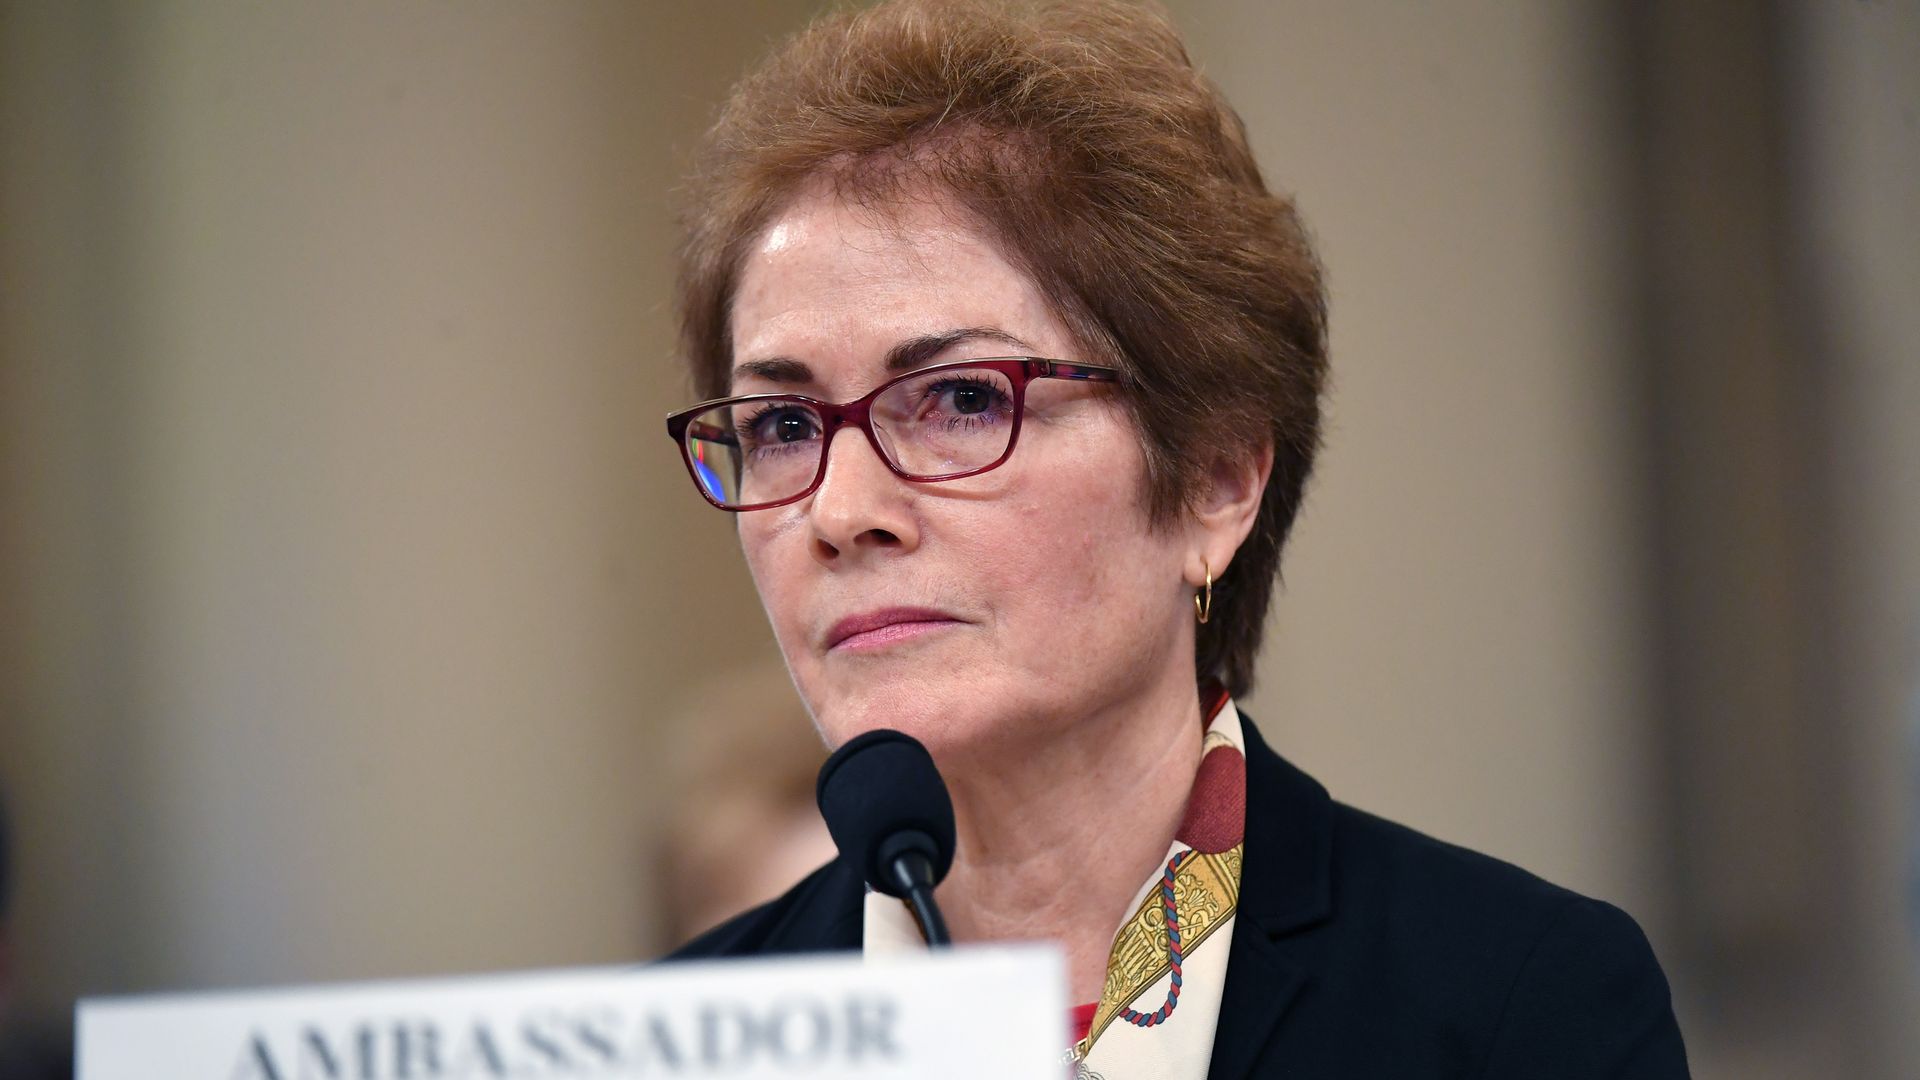 Former Ambassador to Ukraine, Marie Yovanovitch appears before the House Intelligence Committee 